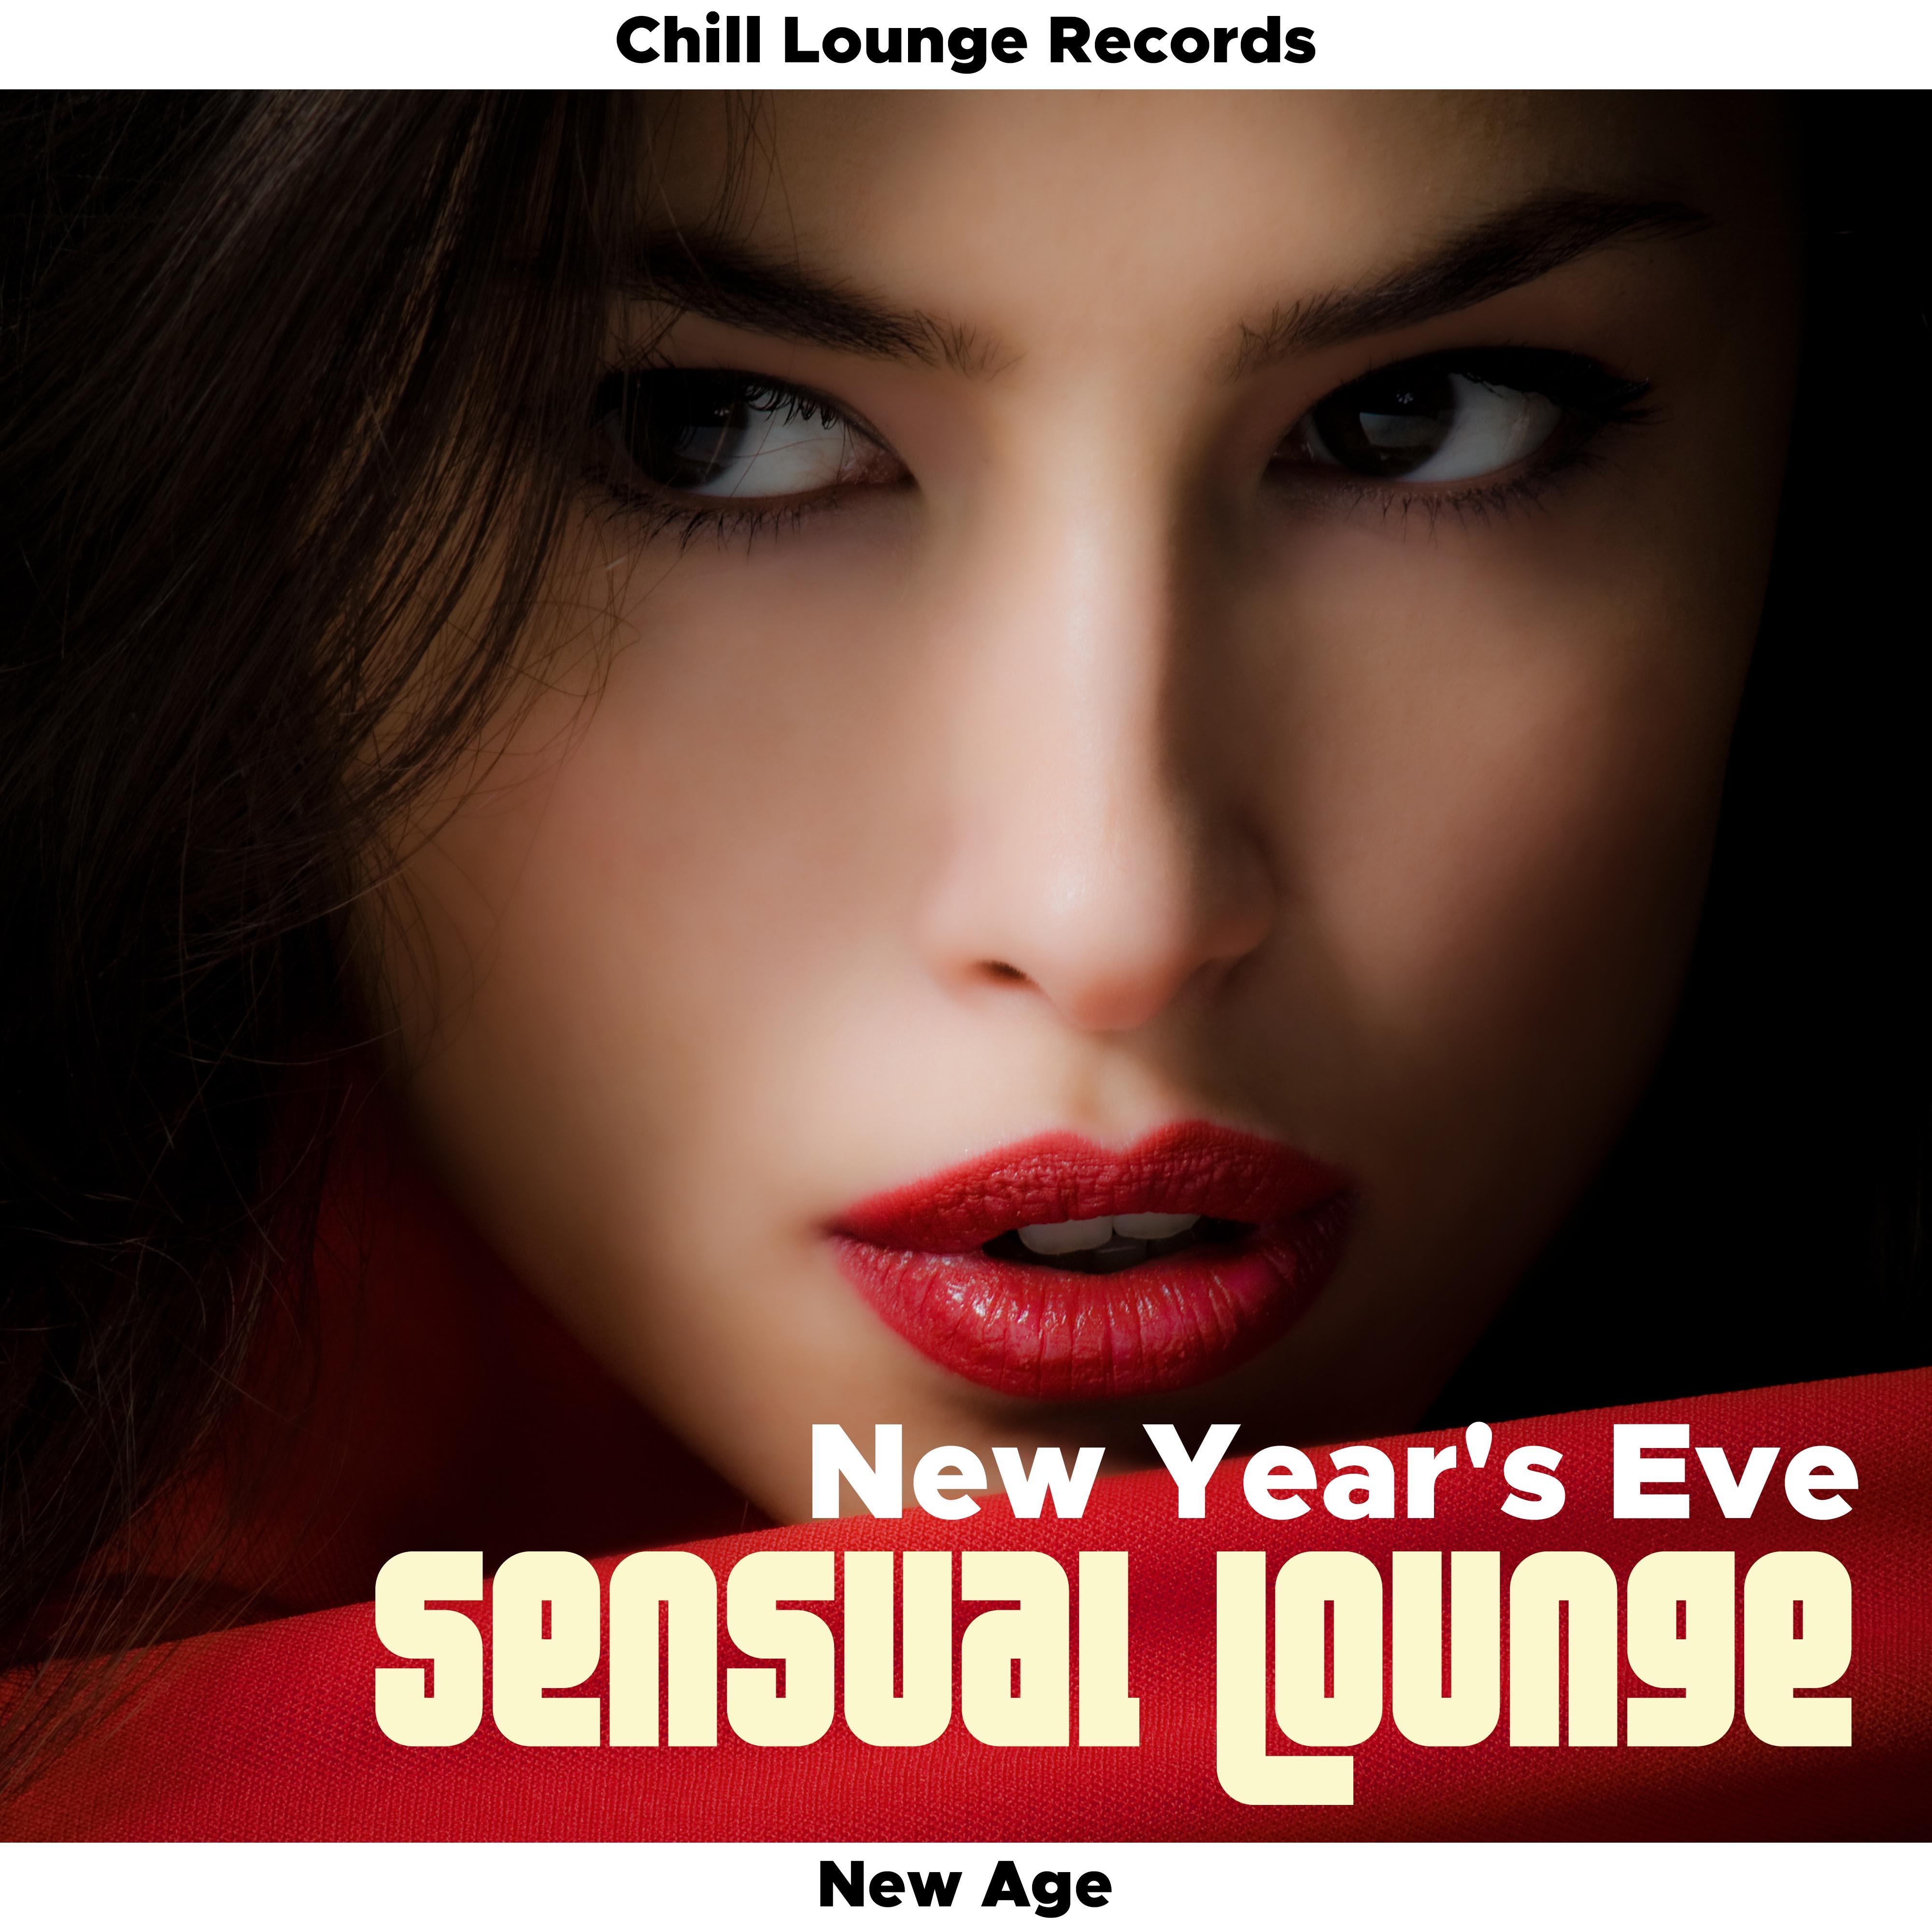 New Year's Eve Sensual Lounge Collection – Chill Lounge Bar New Year 2017 Private Party Songs